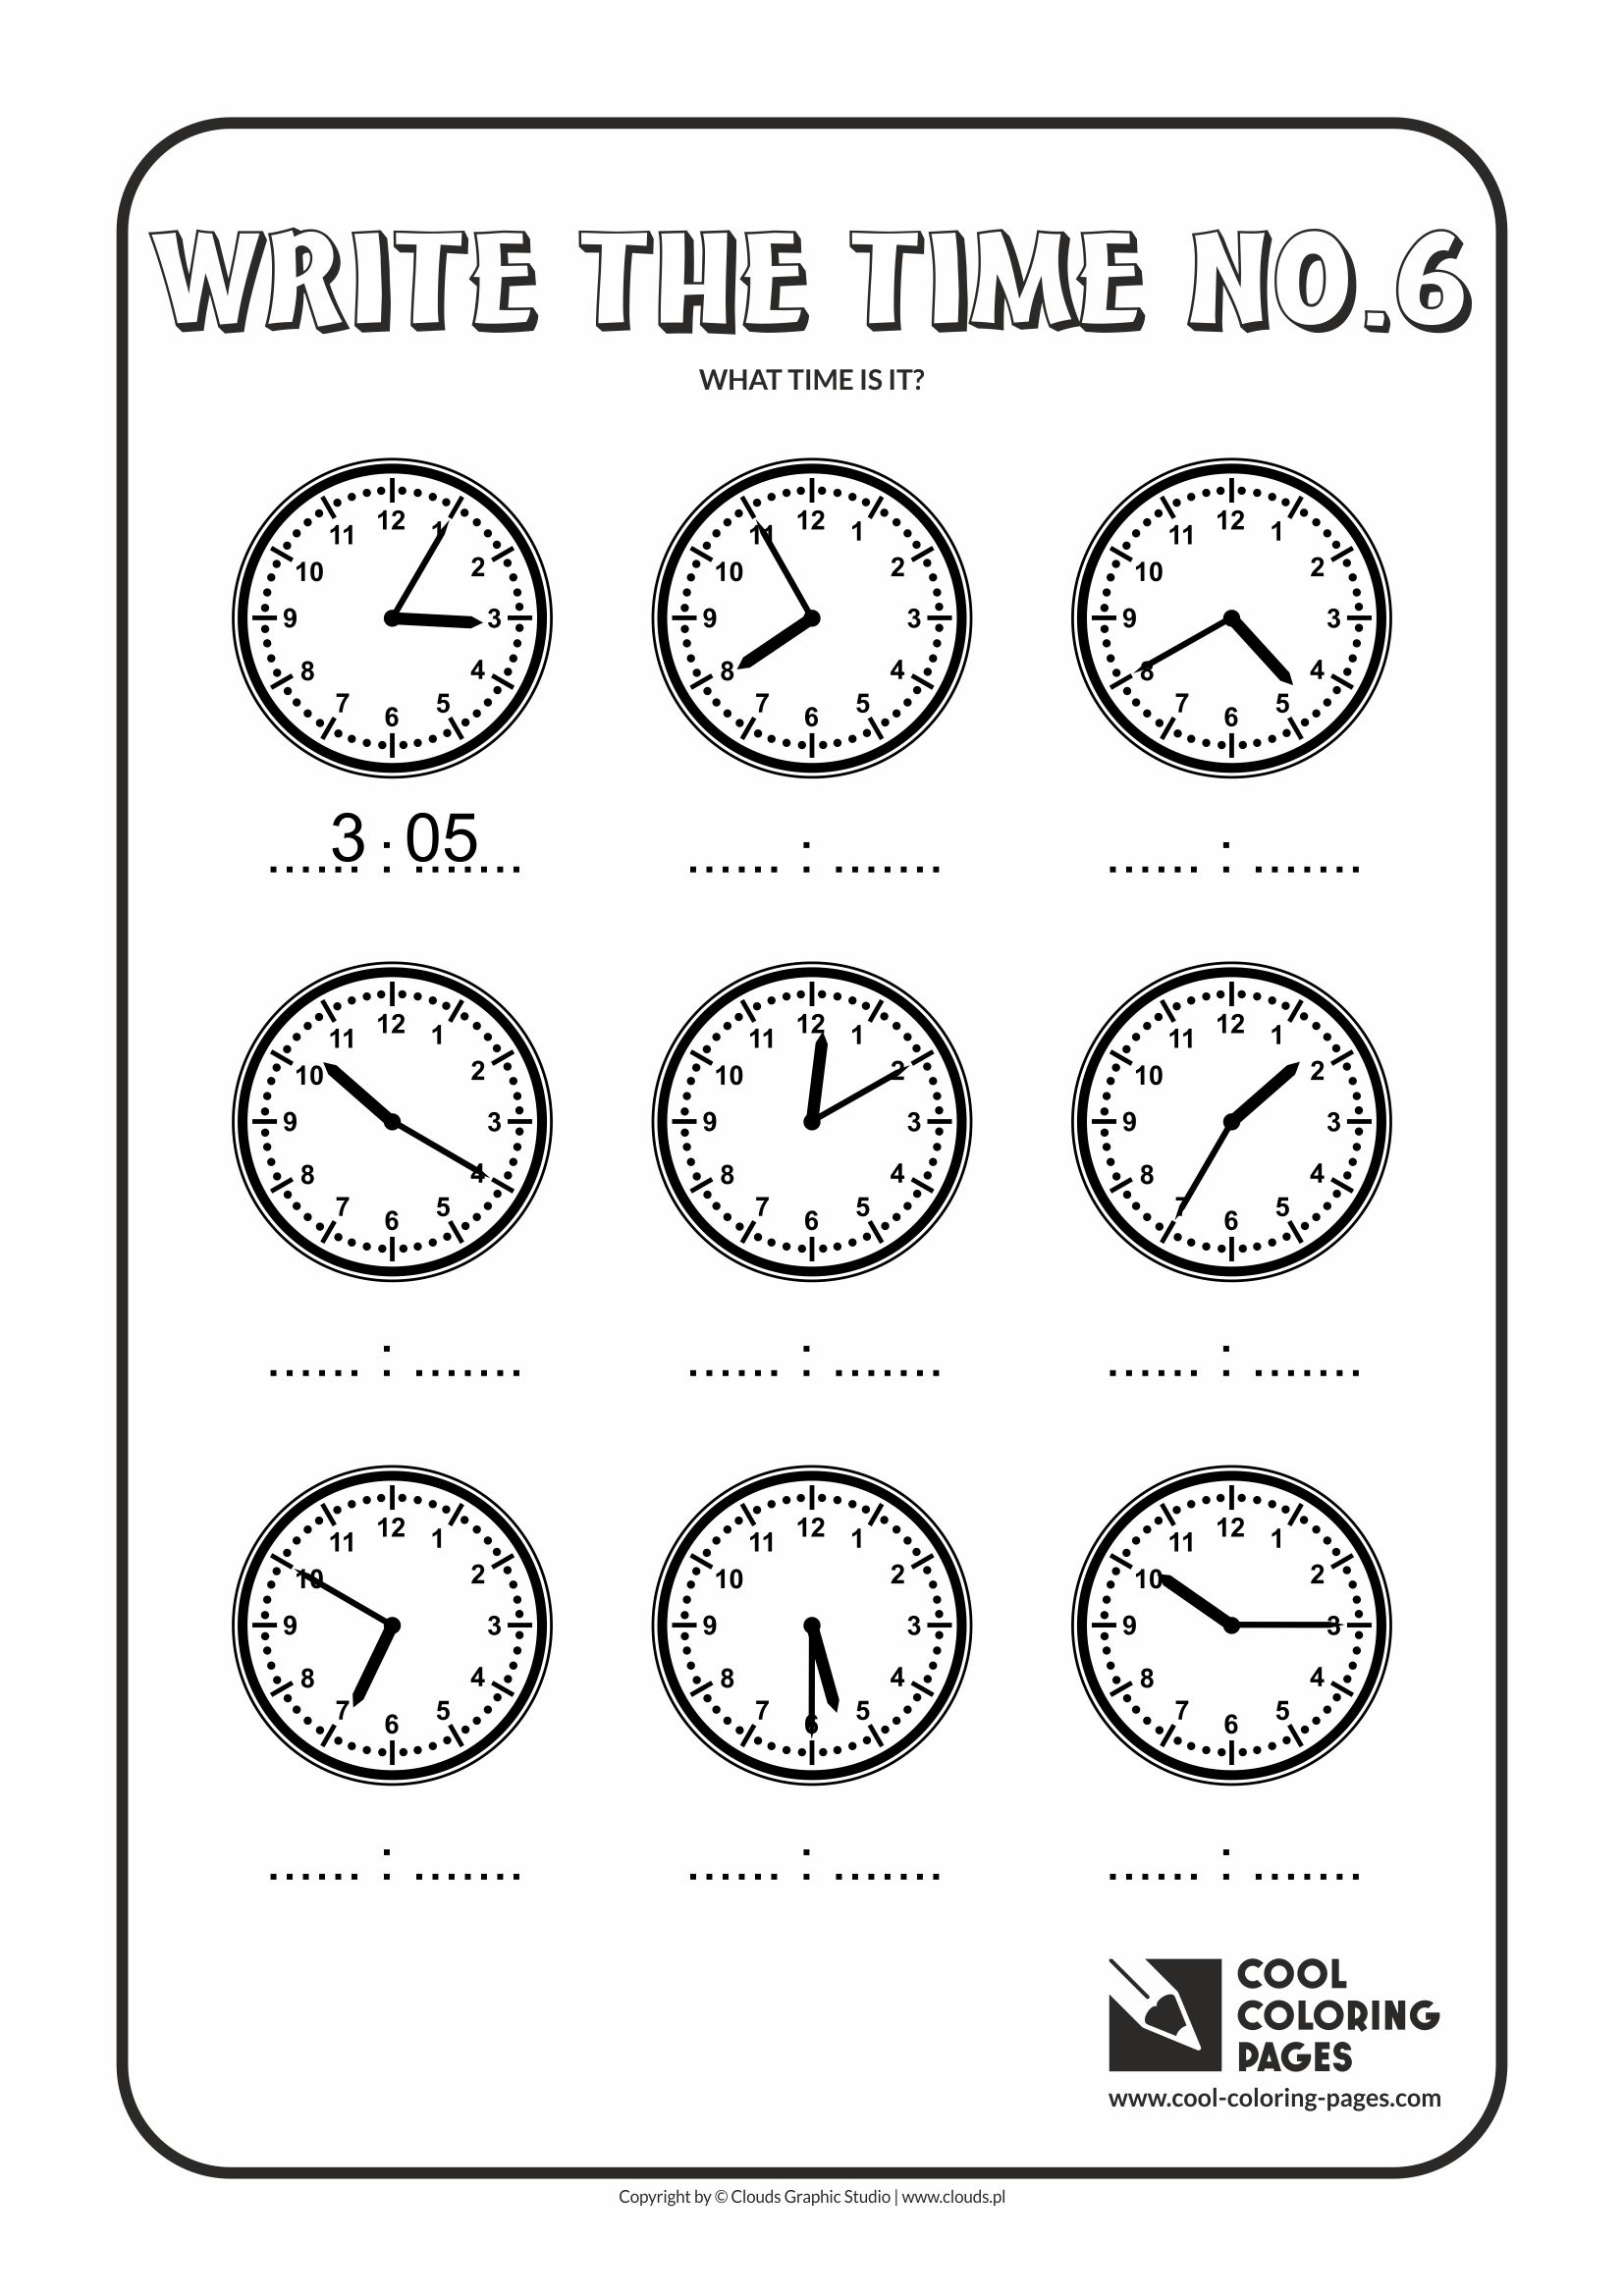 Cool Coloring Pages - Time / Write the time no.6